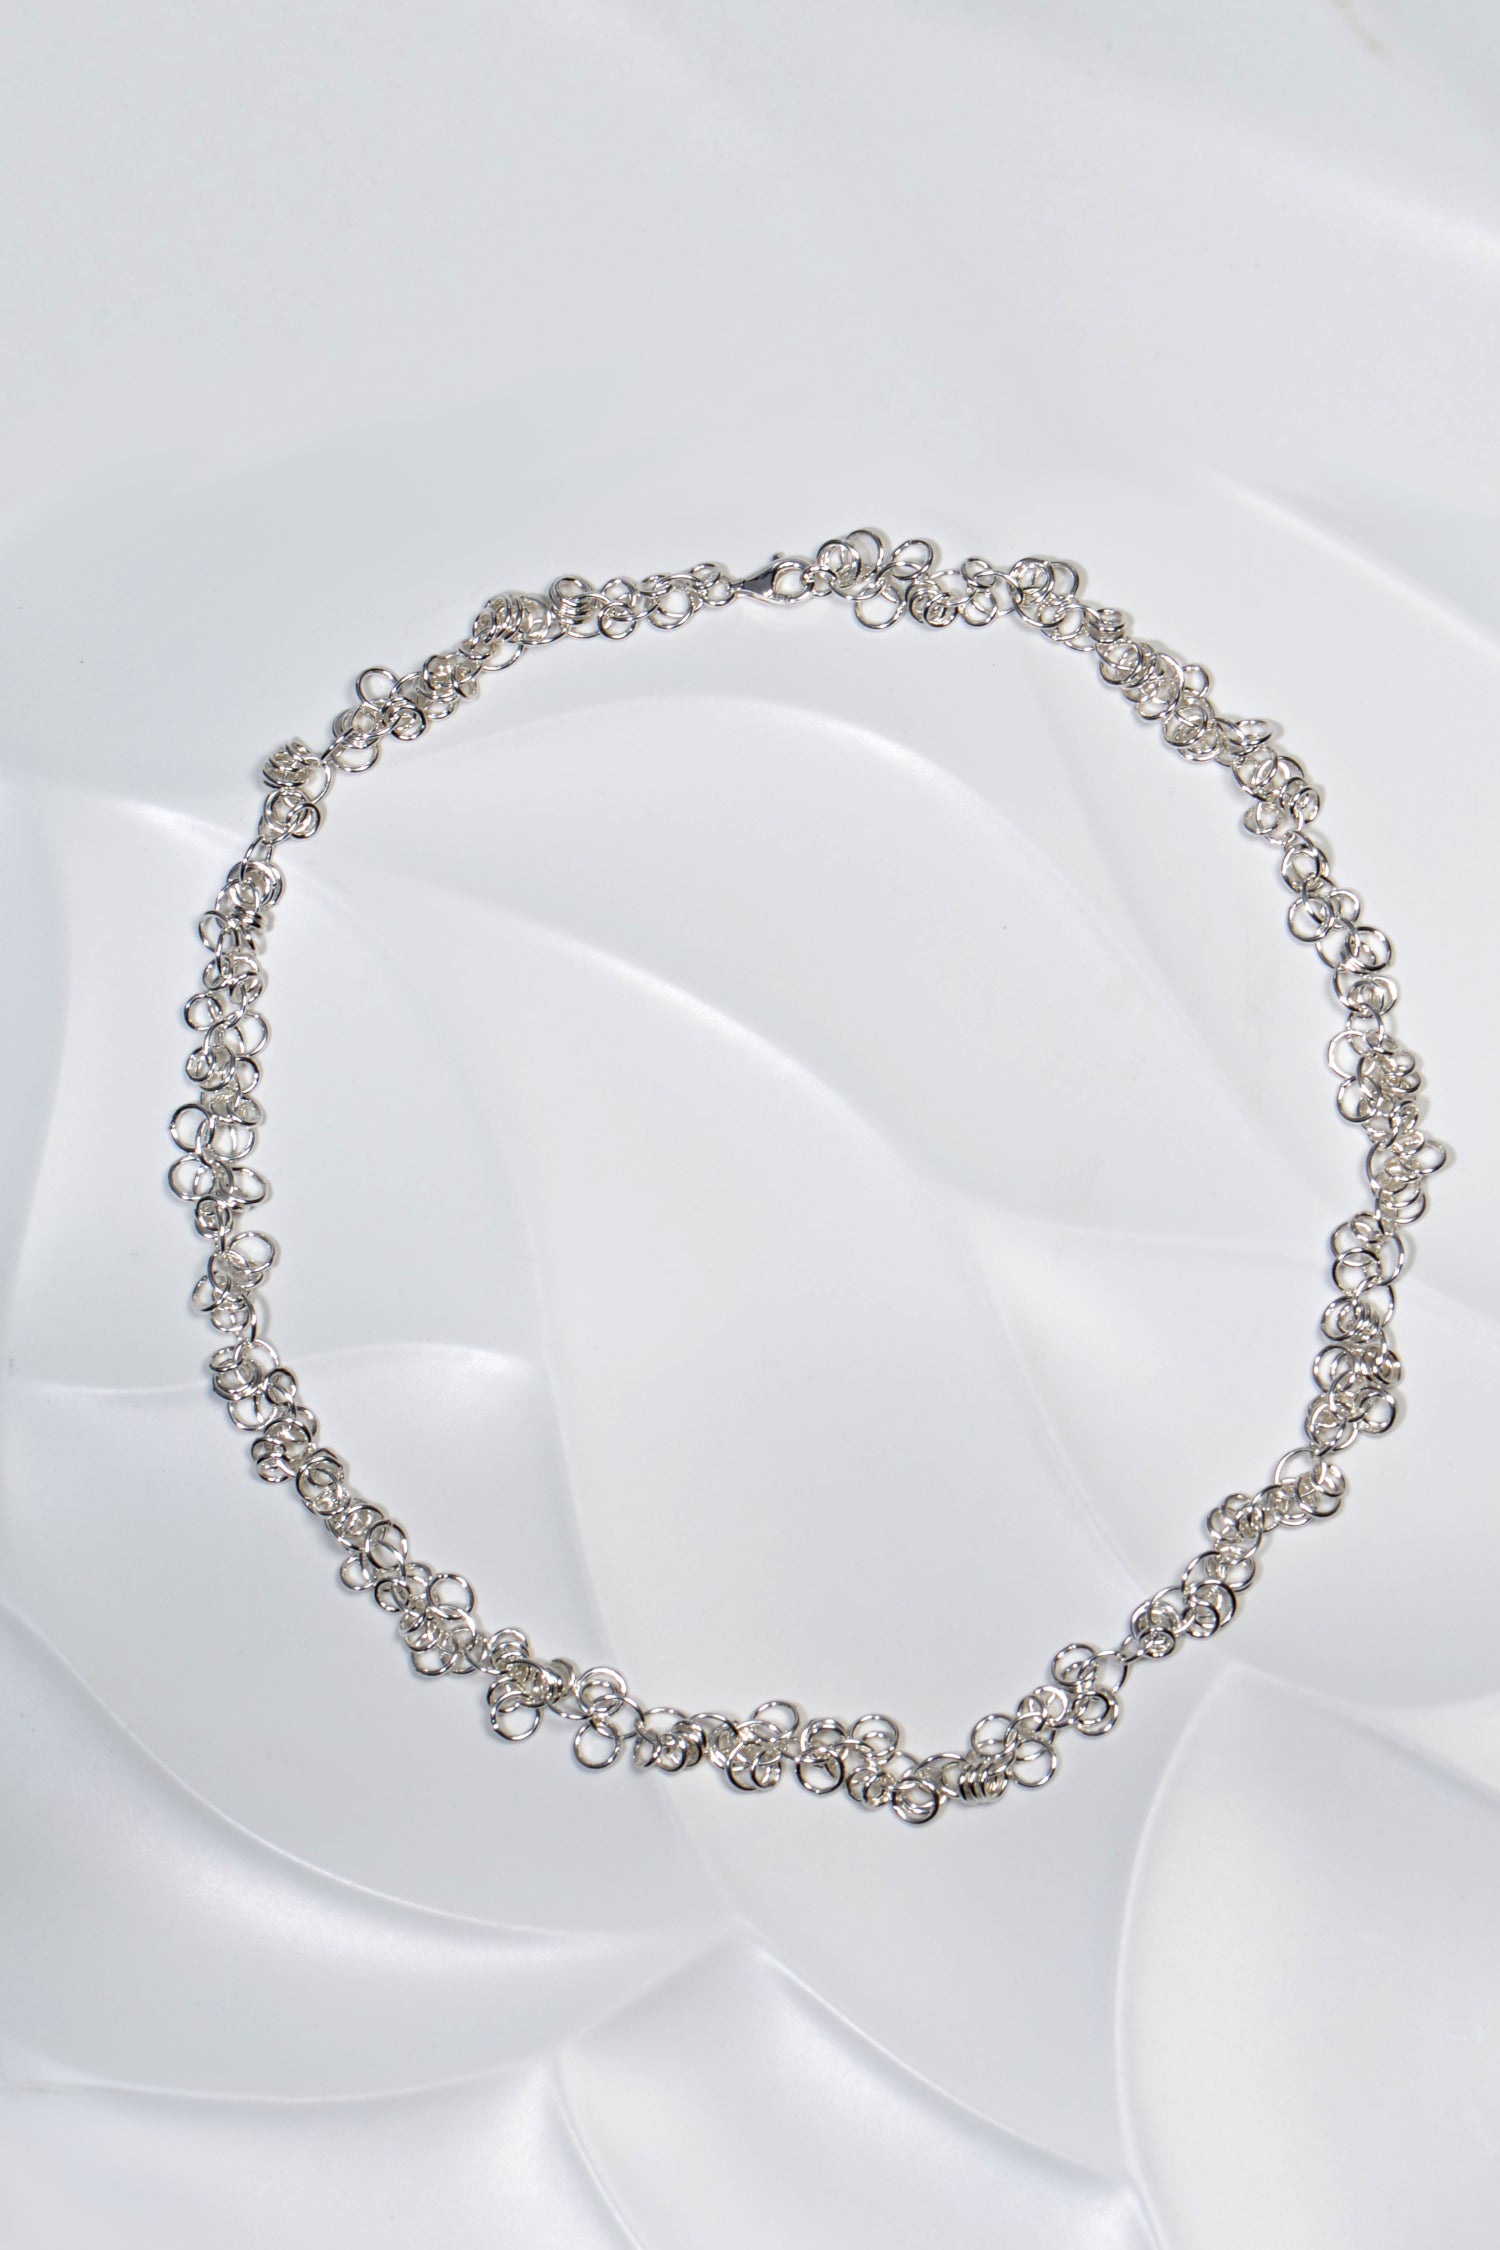 view of the full silver designer necklace flat on the surface